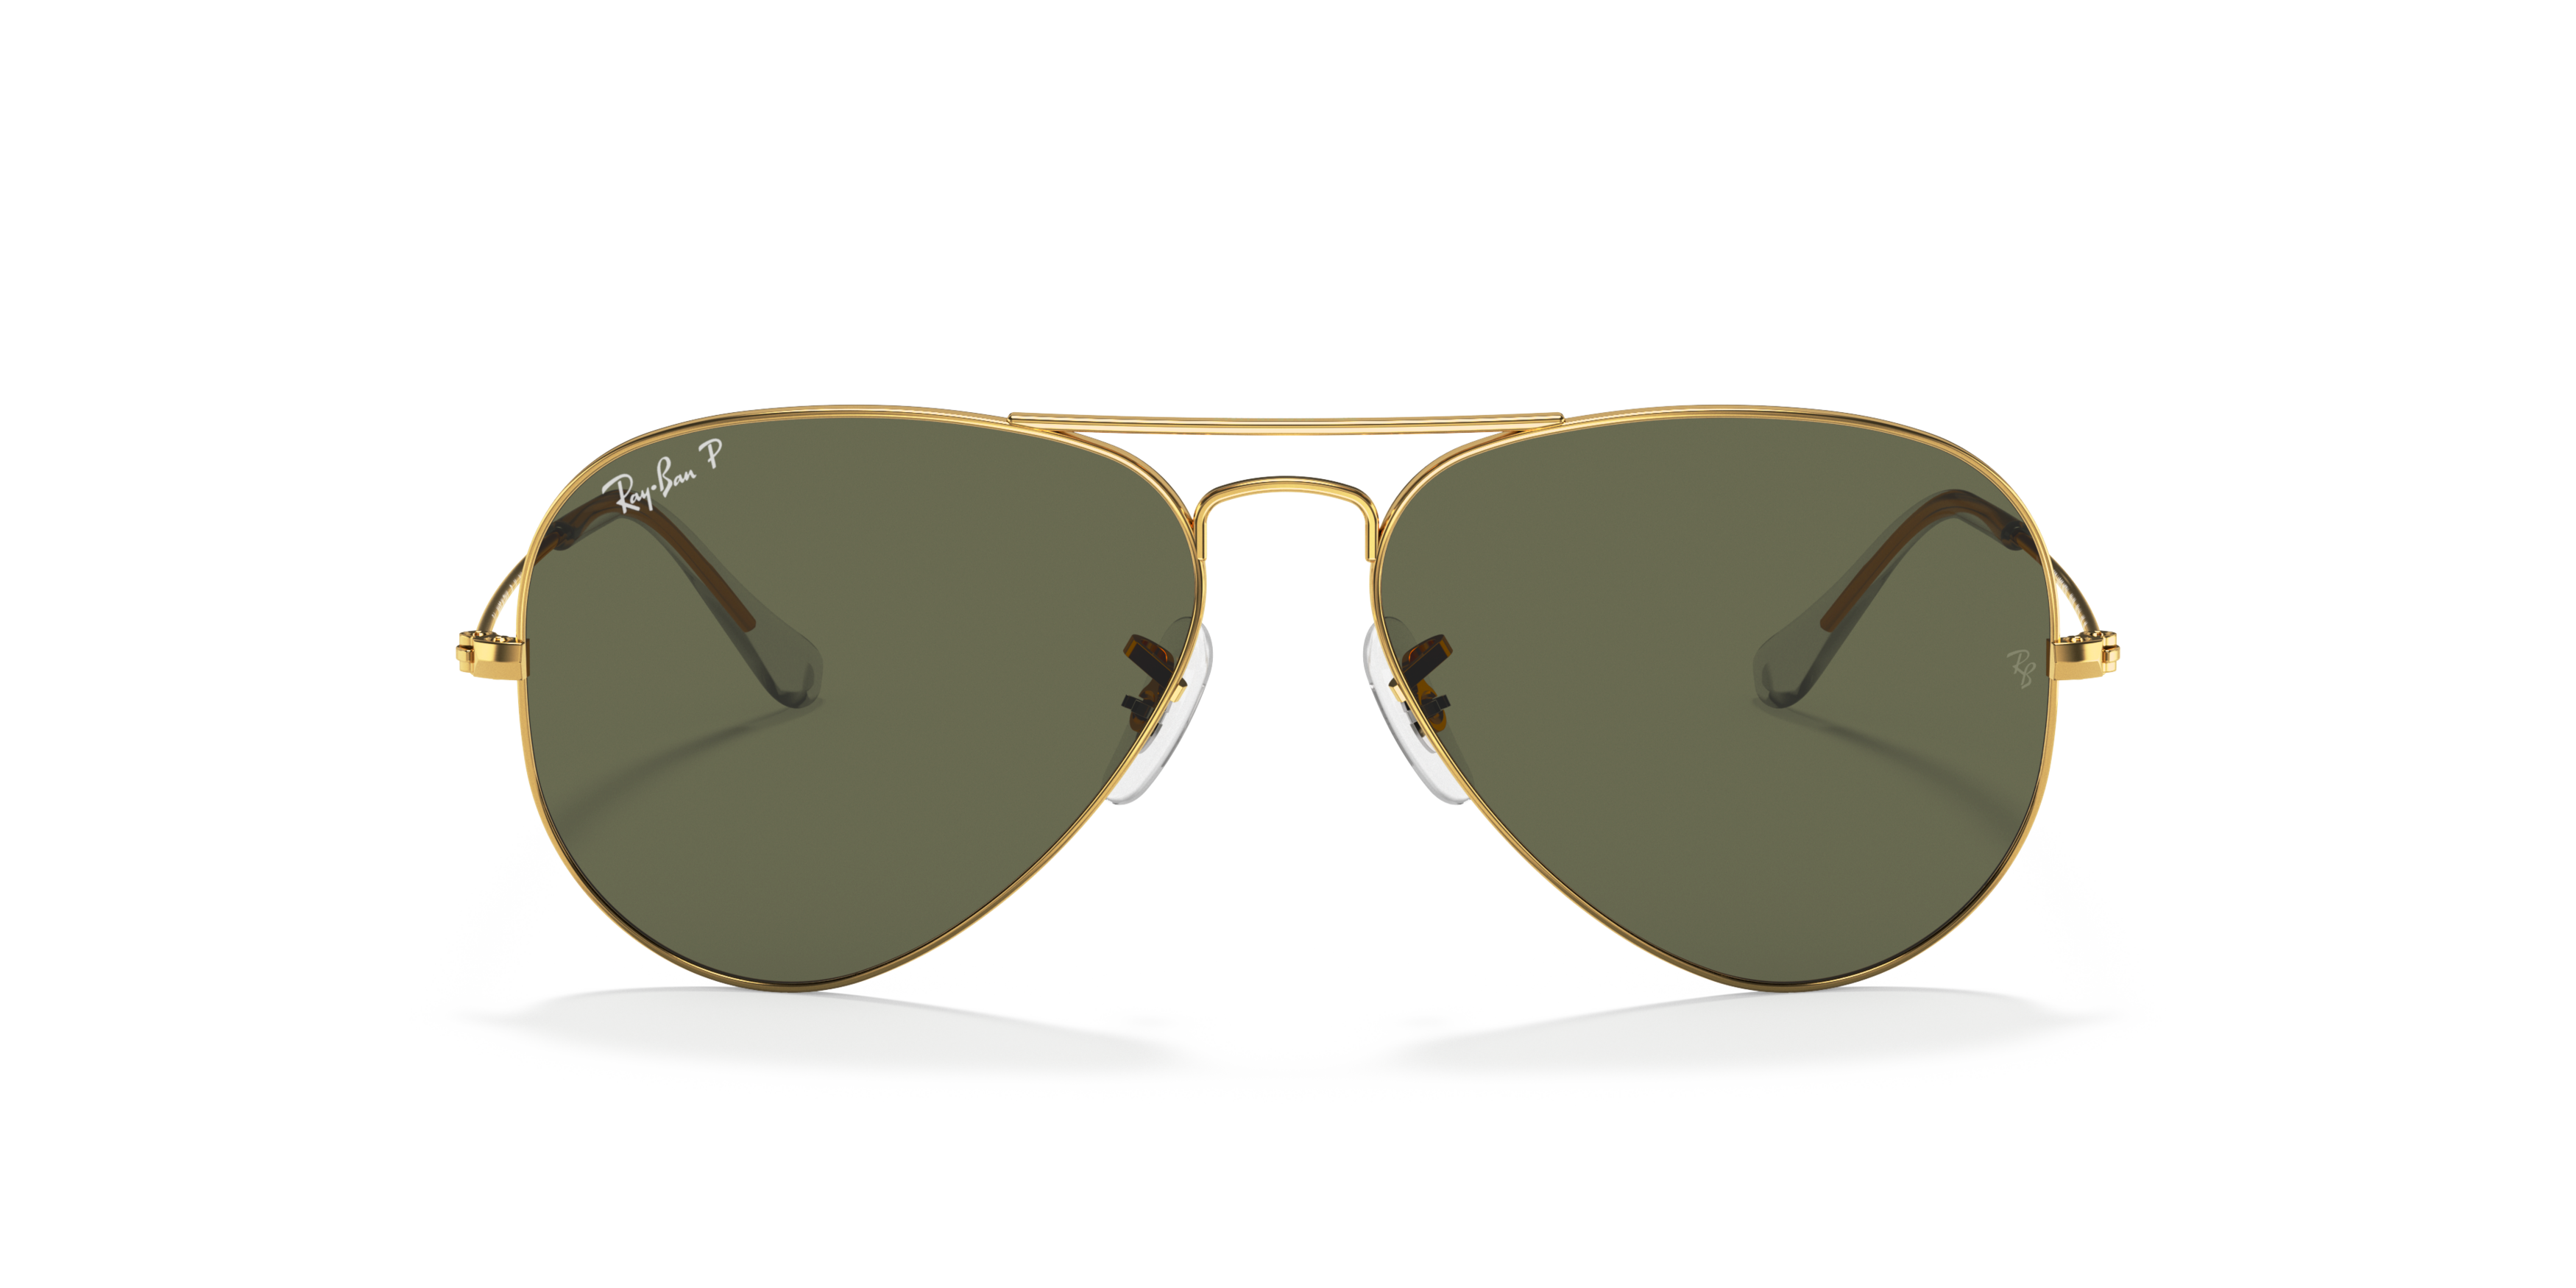 [products.image.front] RAY-BAN RB3025 001/58